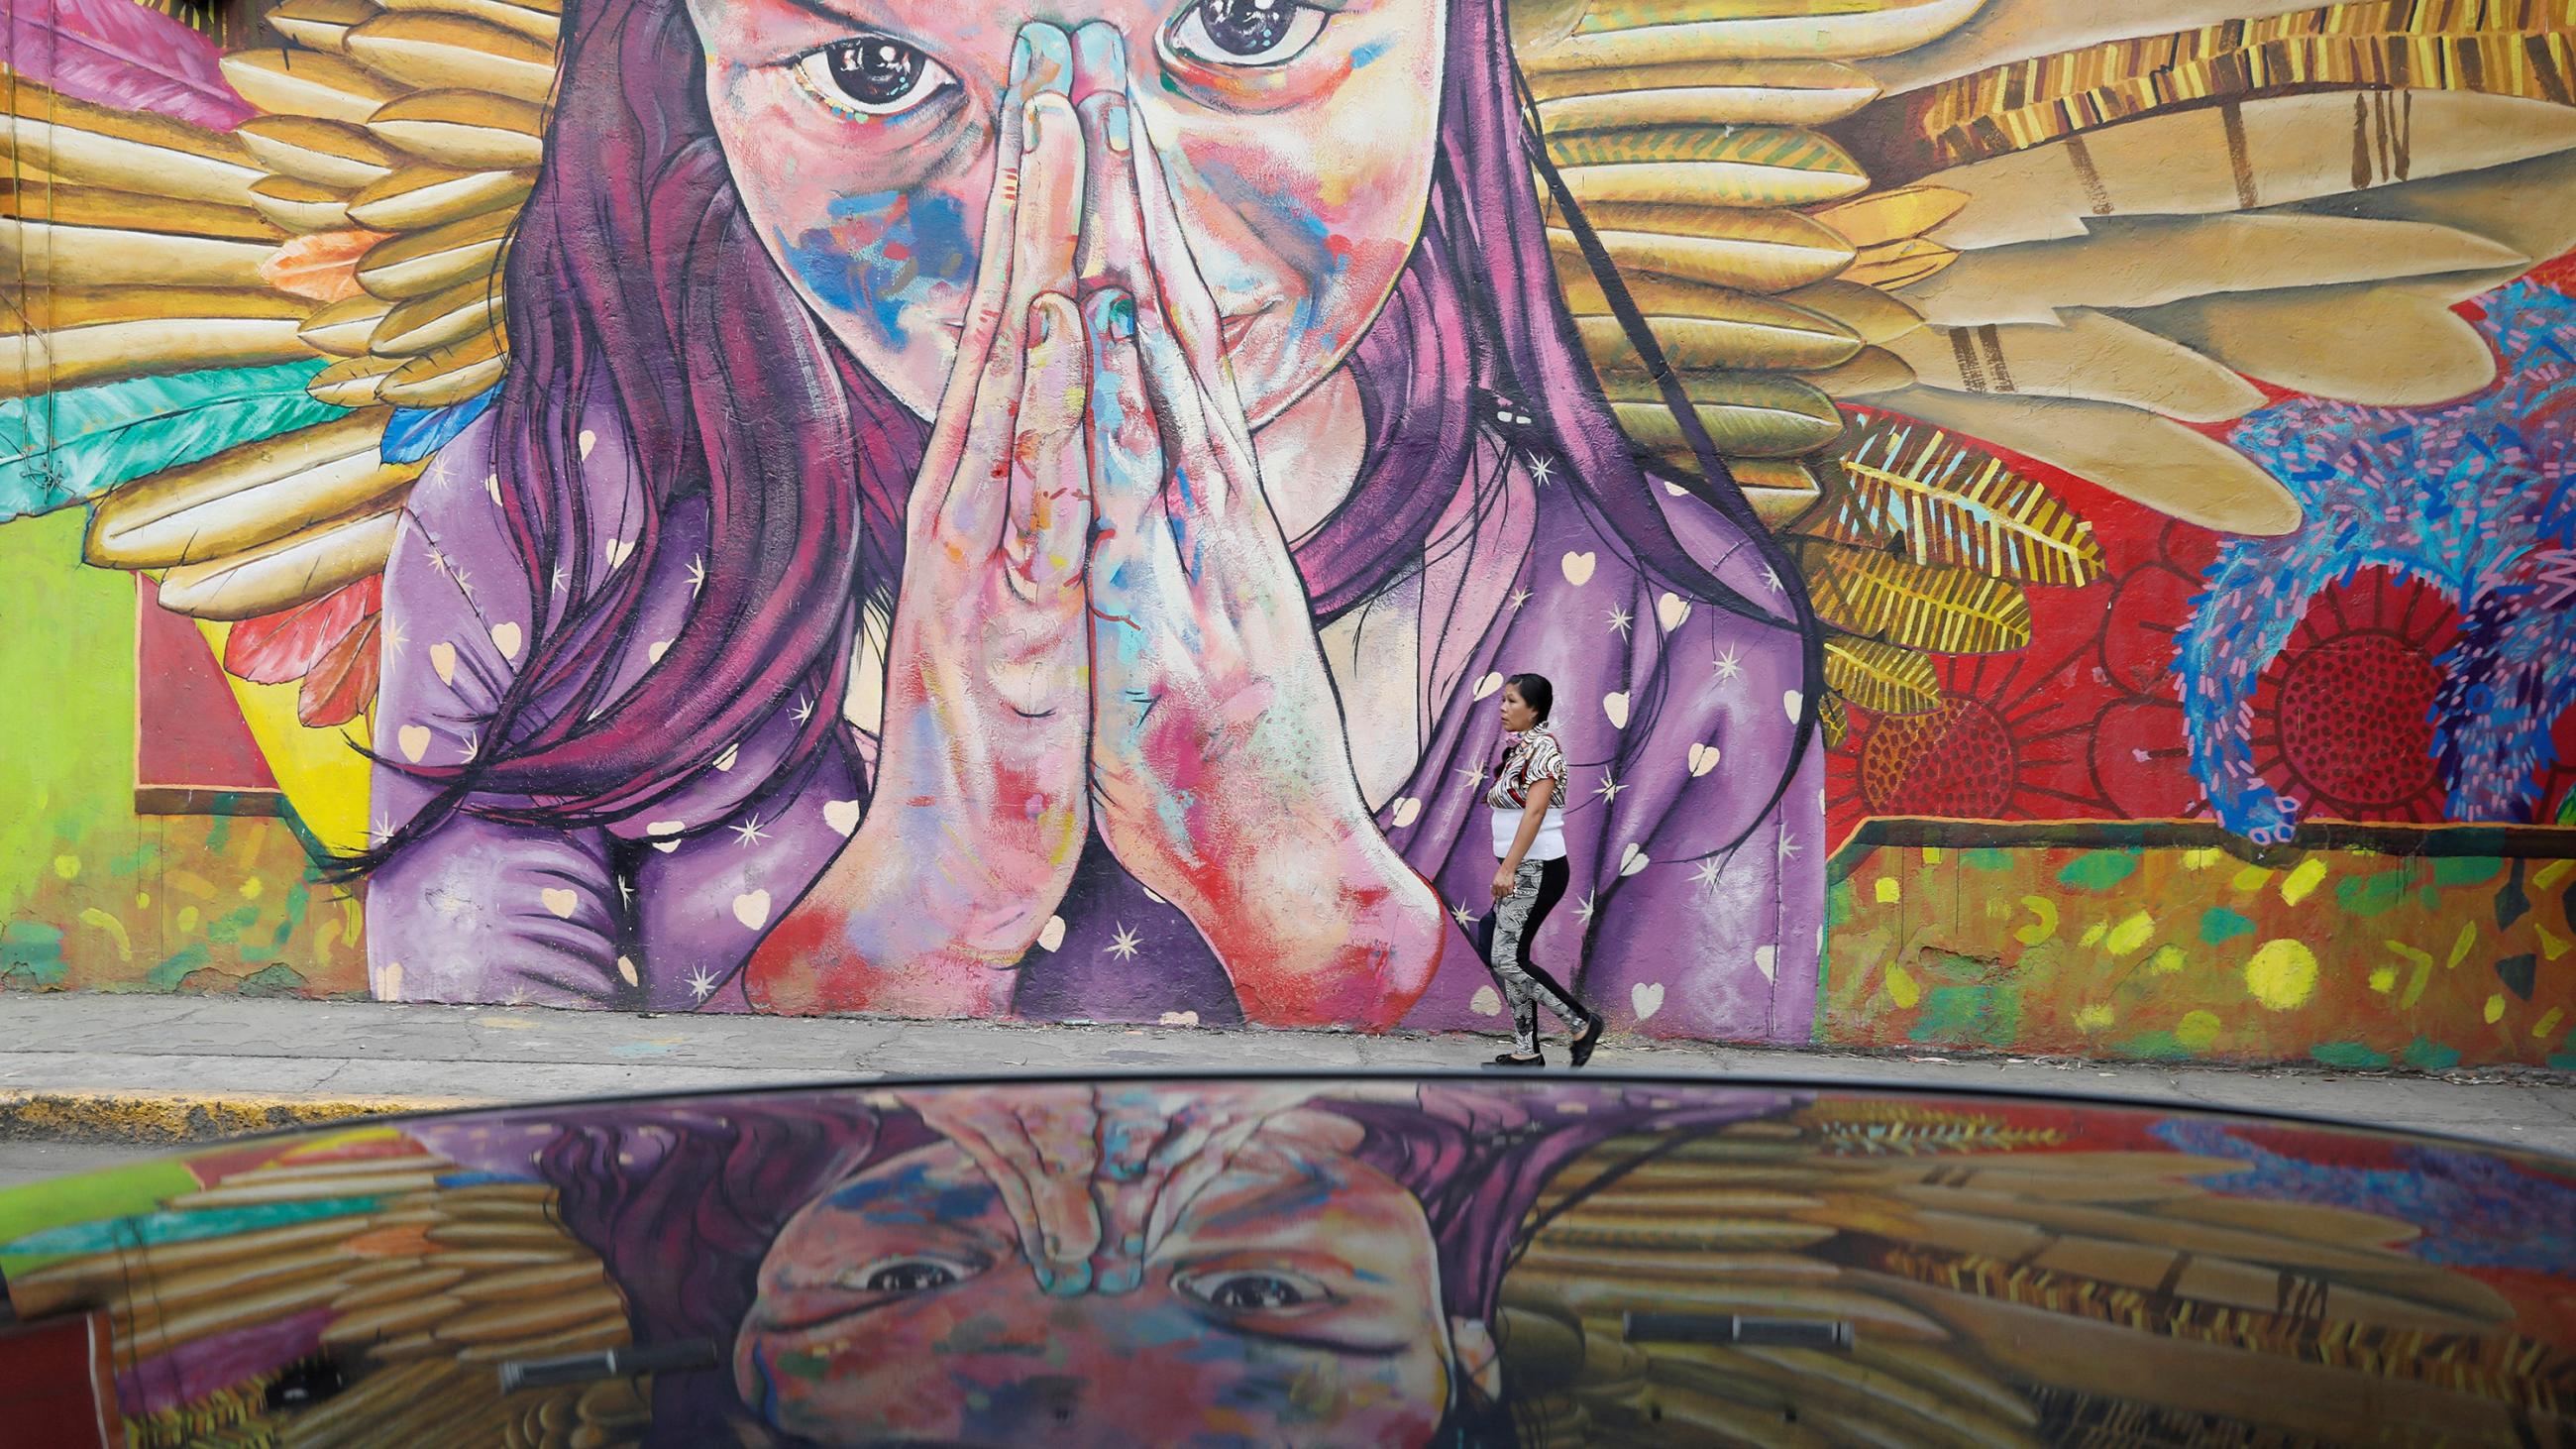 The photo shows an amazing mural on a wall of a woman with angel's wings and her hands together, as if in prayer. A woman walking in front of the mural demonstrates that the scale of the painting is massive. 